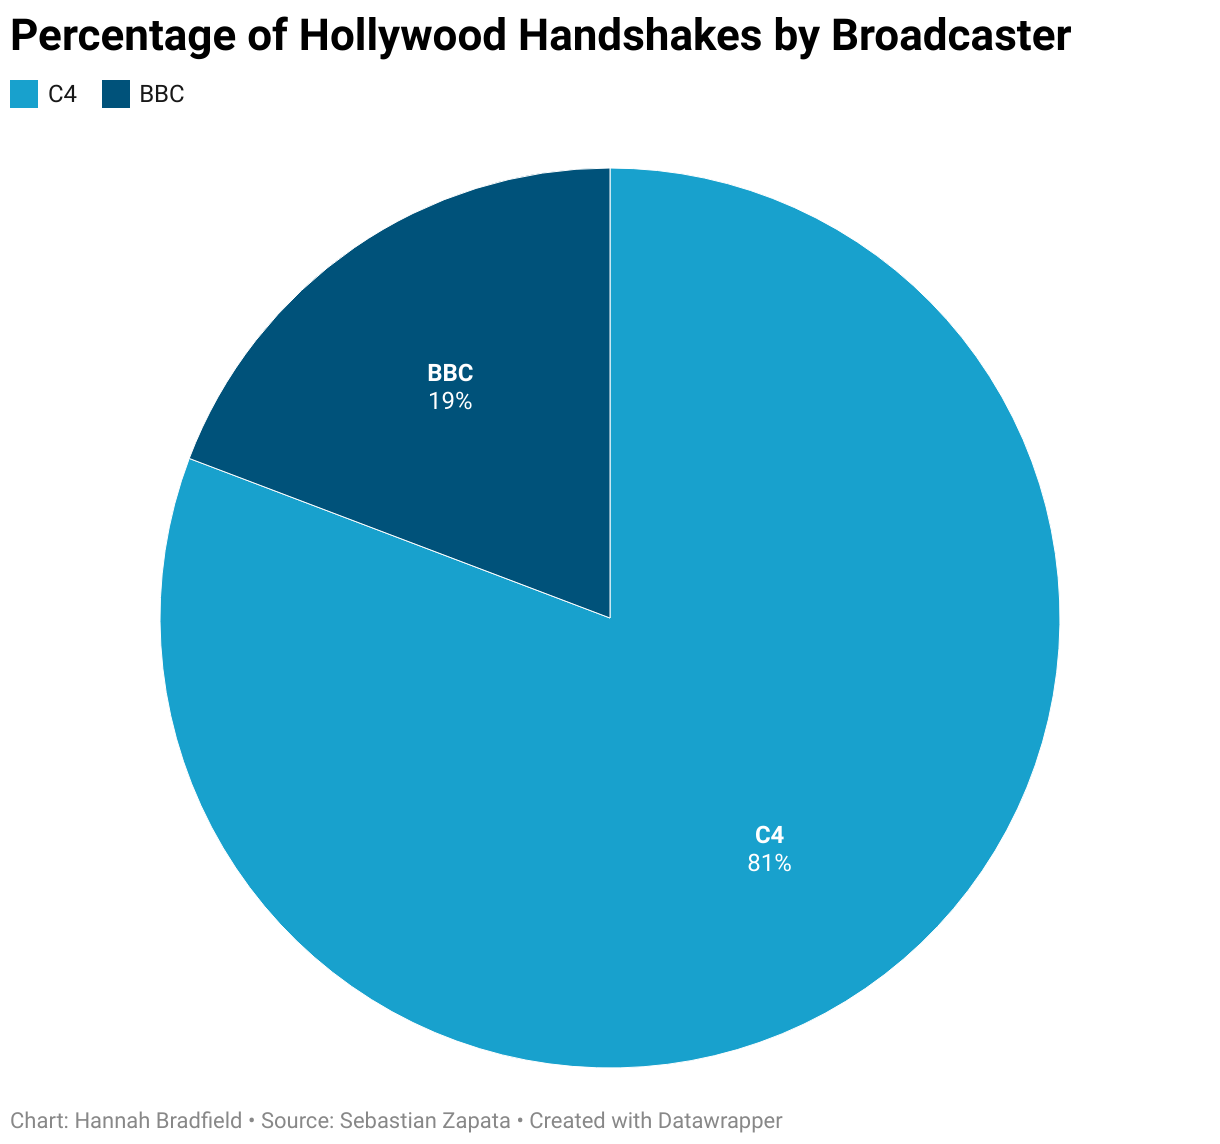 A pie chart showing percentage of handshakes given by Paul Hollywood during the time the show was broadcast by the BBC (19%) and Channel 4 (81%). 